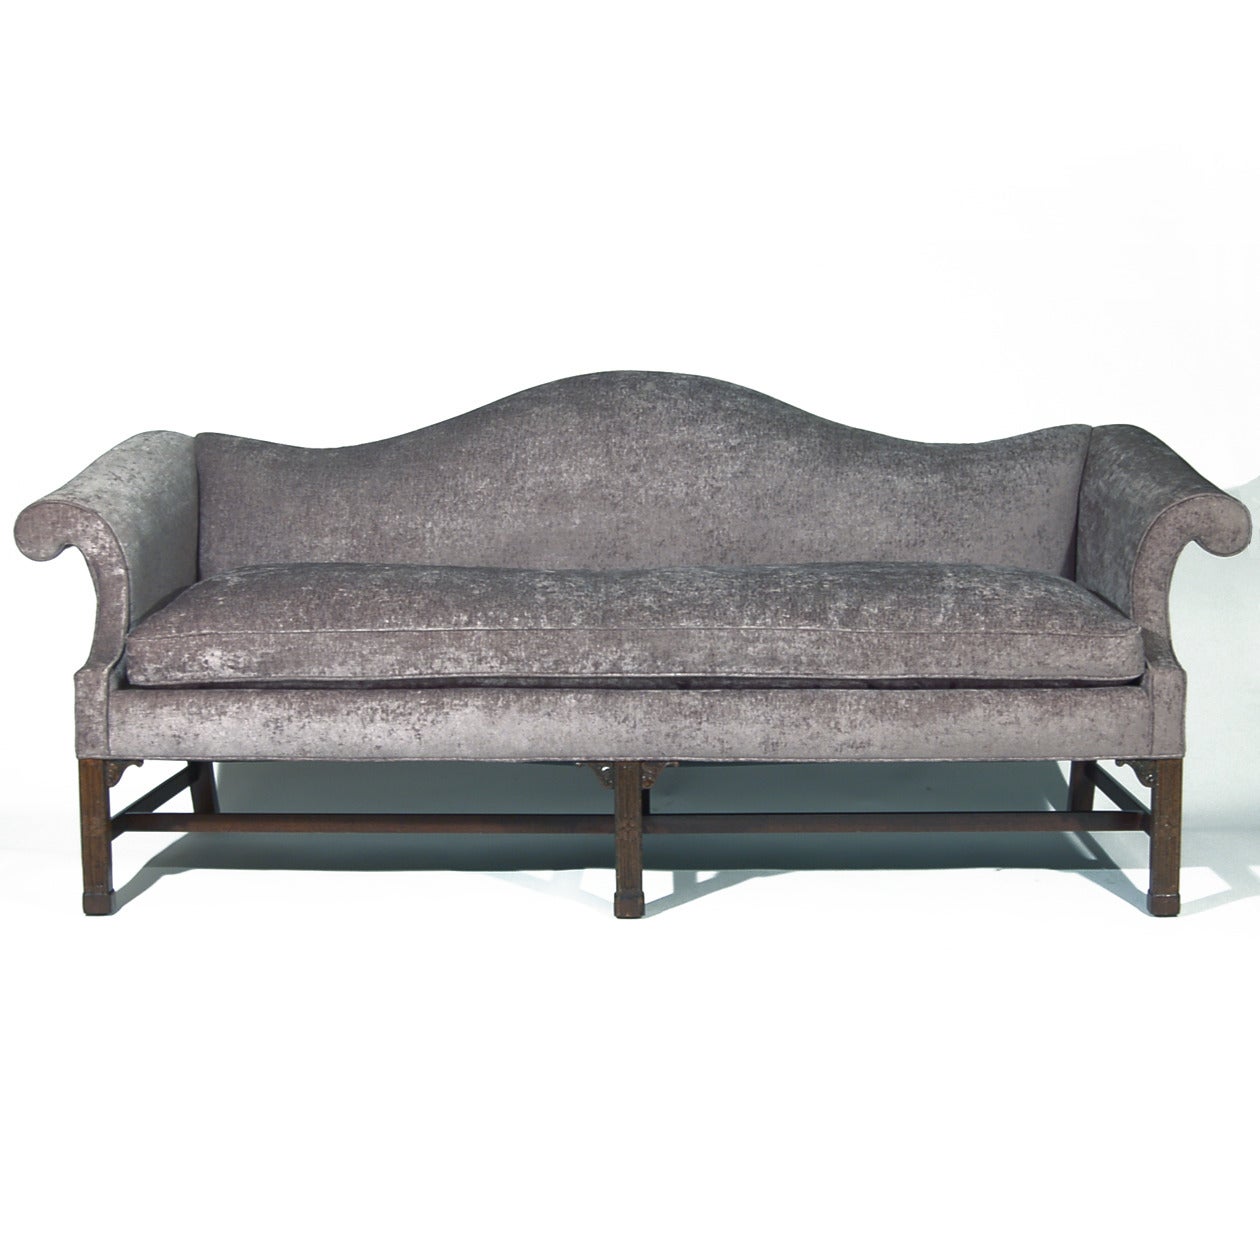 Chippendale Design Camel Back Sofa In Excellent Condition For Sale In Baltimore, MD